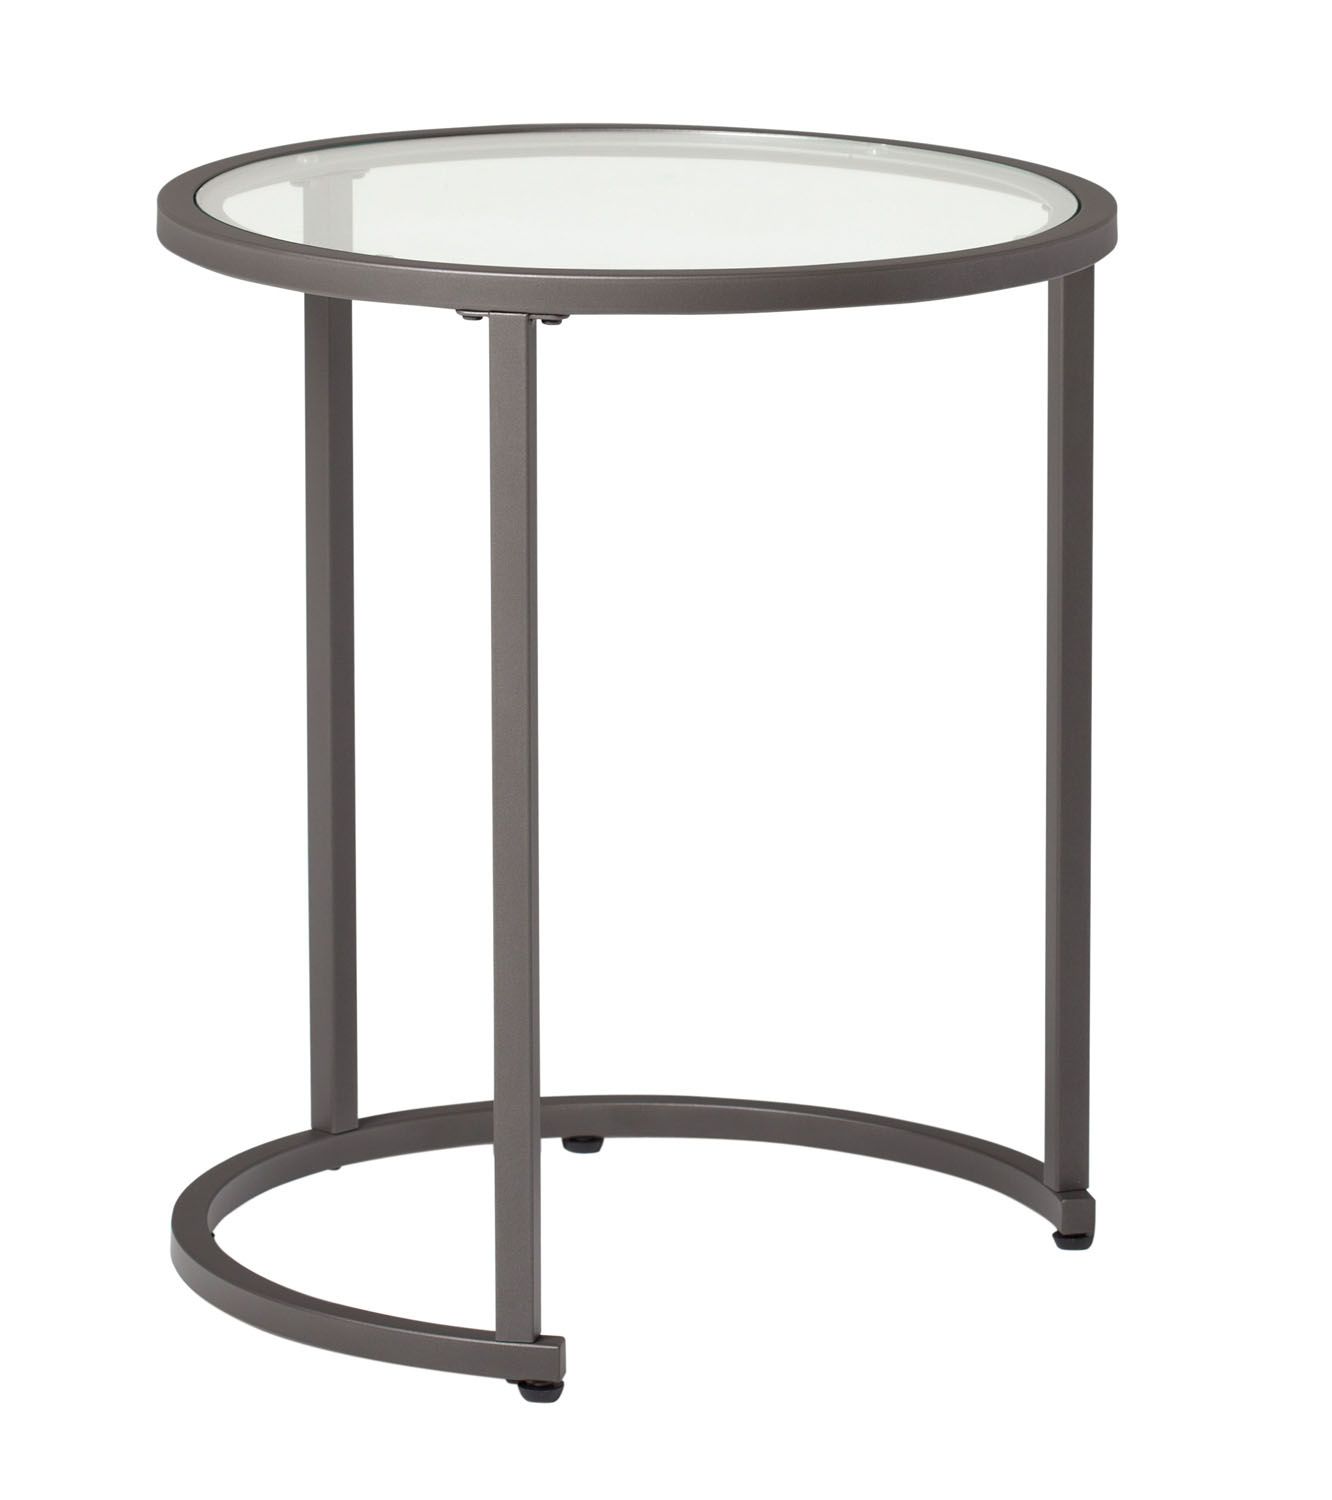 Offex Modern Glass Round Nesting Tables In Pewter 20 Inches – Walmart With Regard To Glass And Pewter Rectangular Desks (Photo 3 of 15)